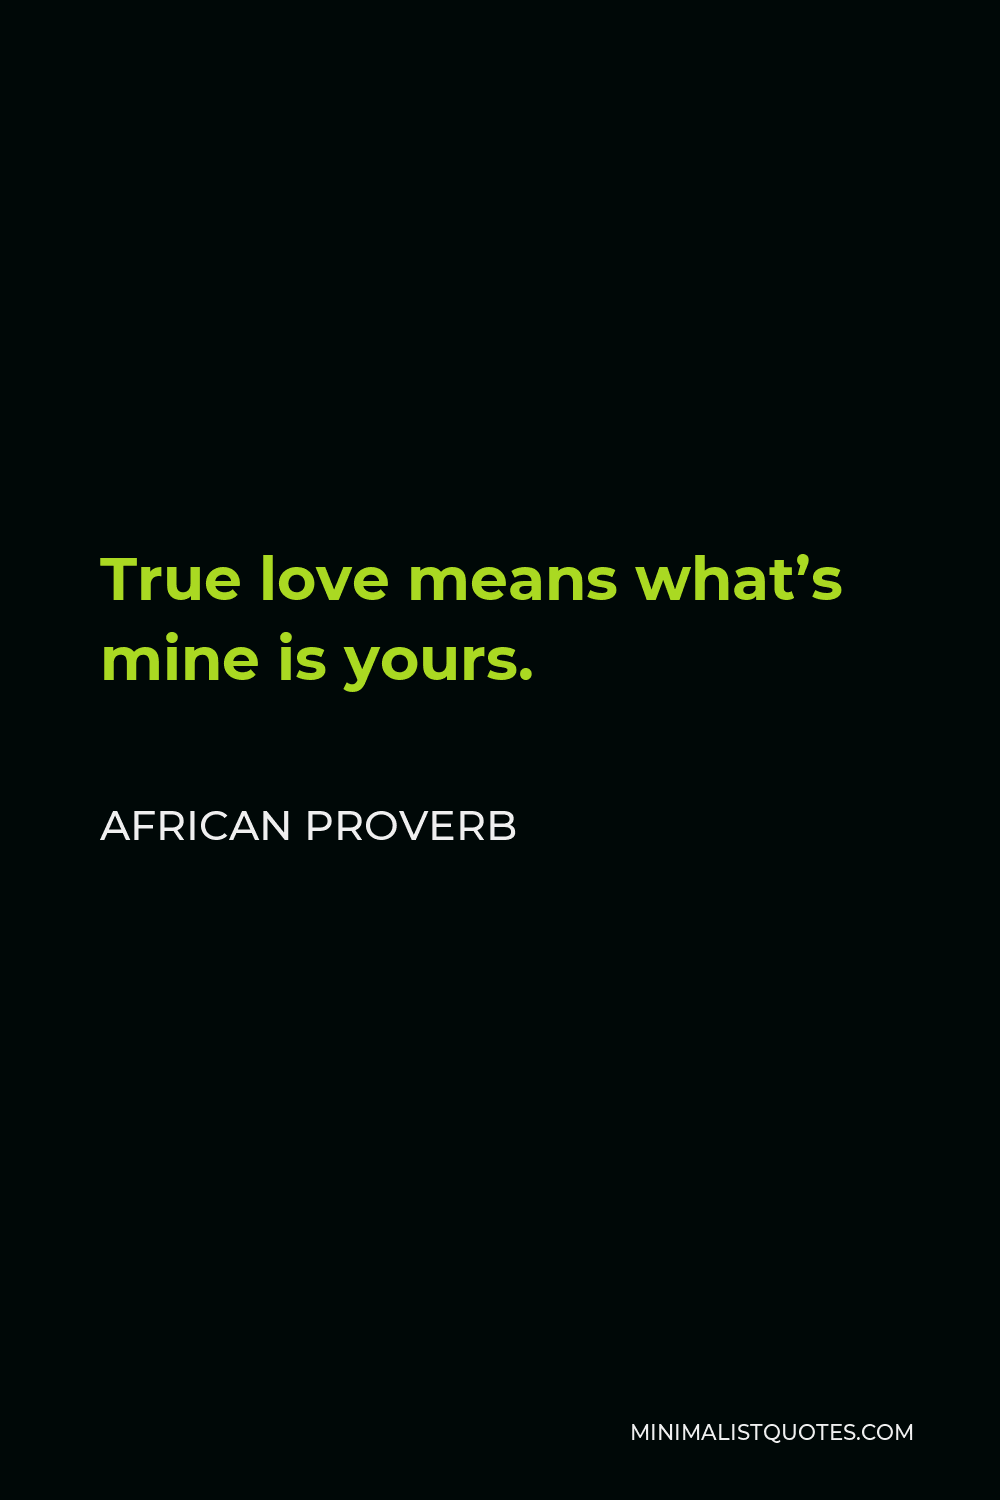 African Proverb Quote - True love means what’s mine is yours.